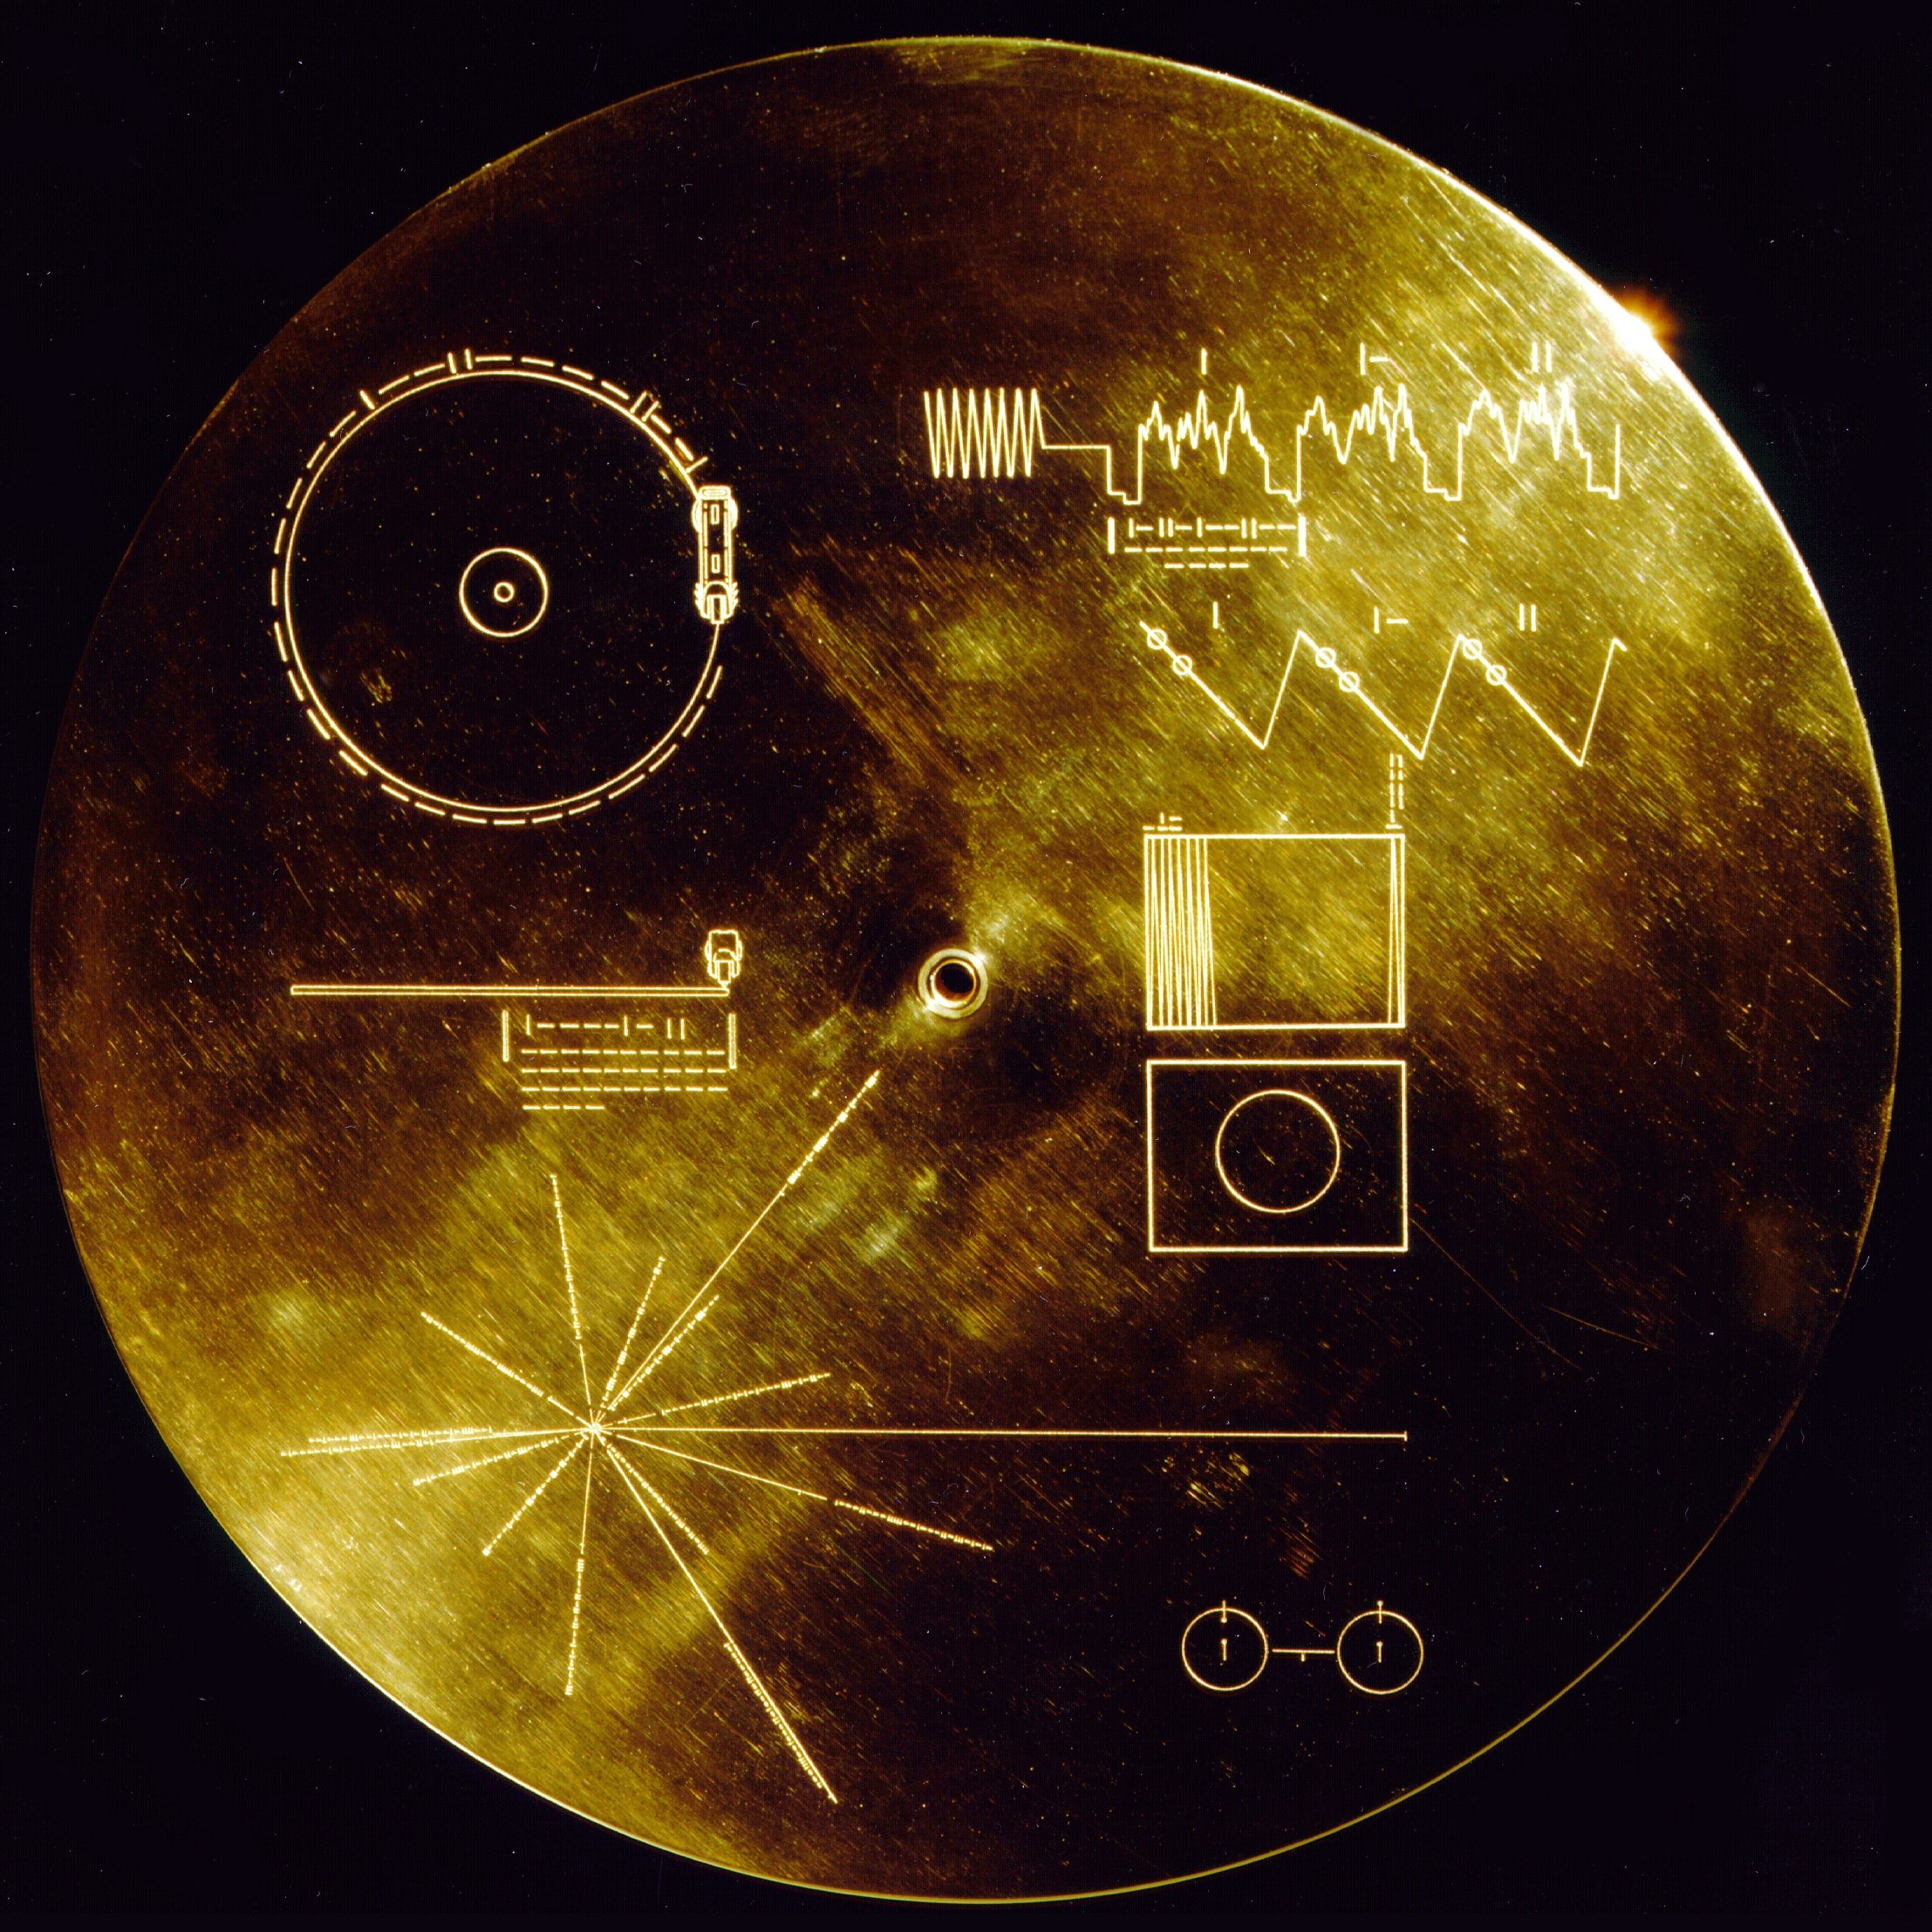 the cover of the golden record